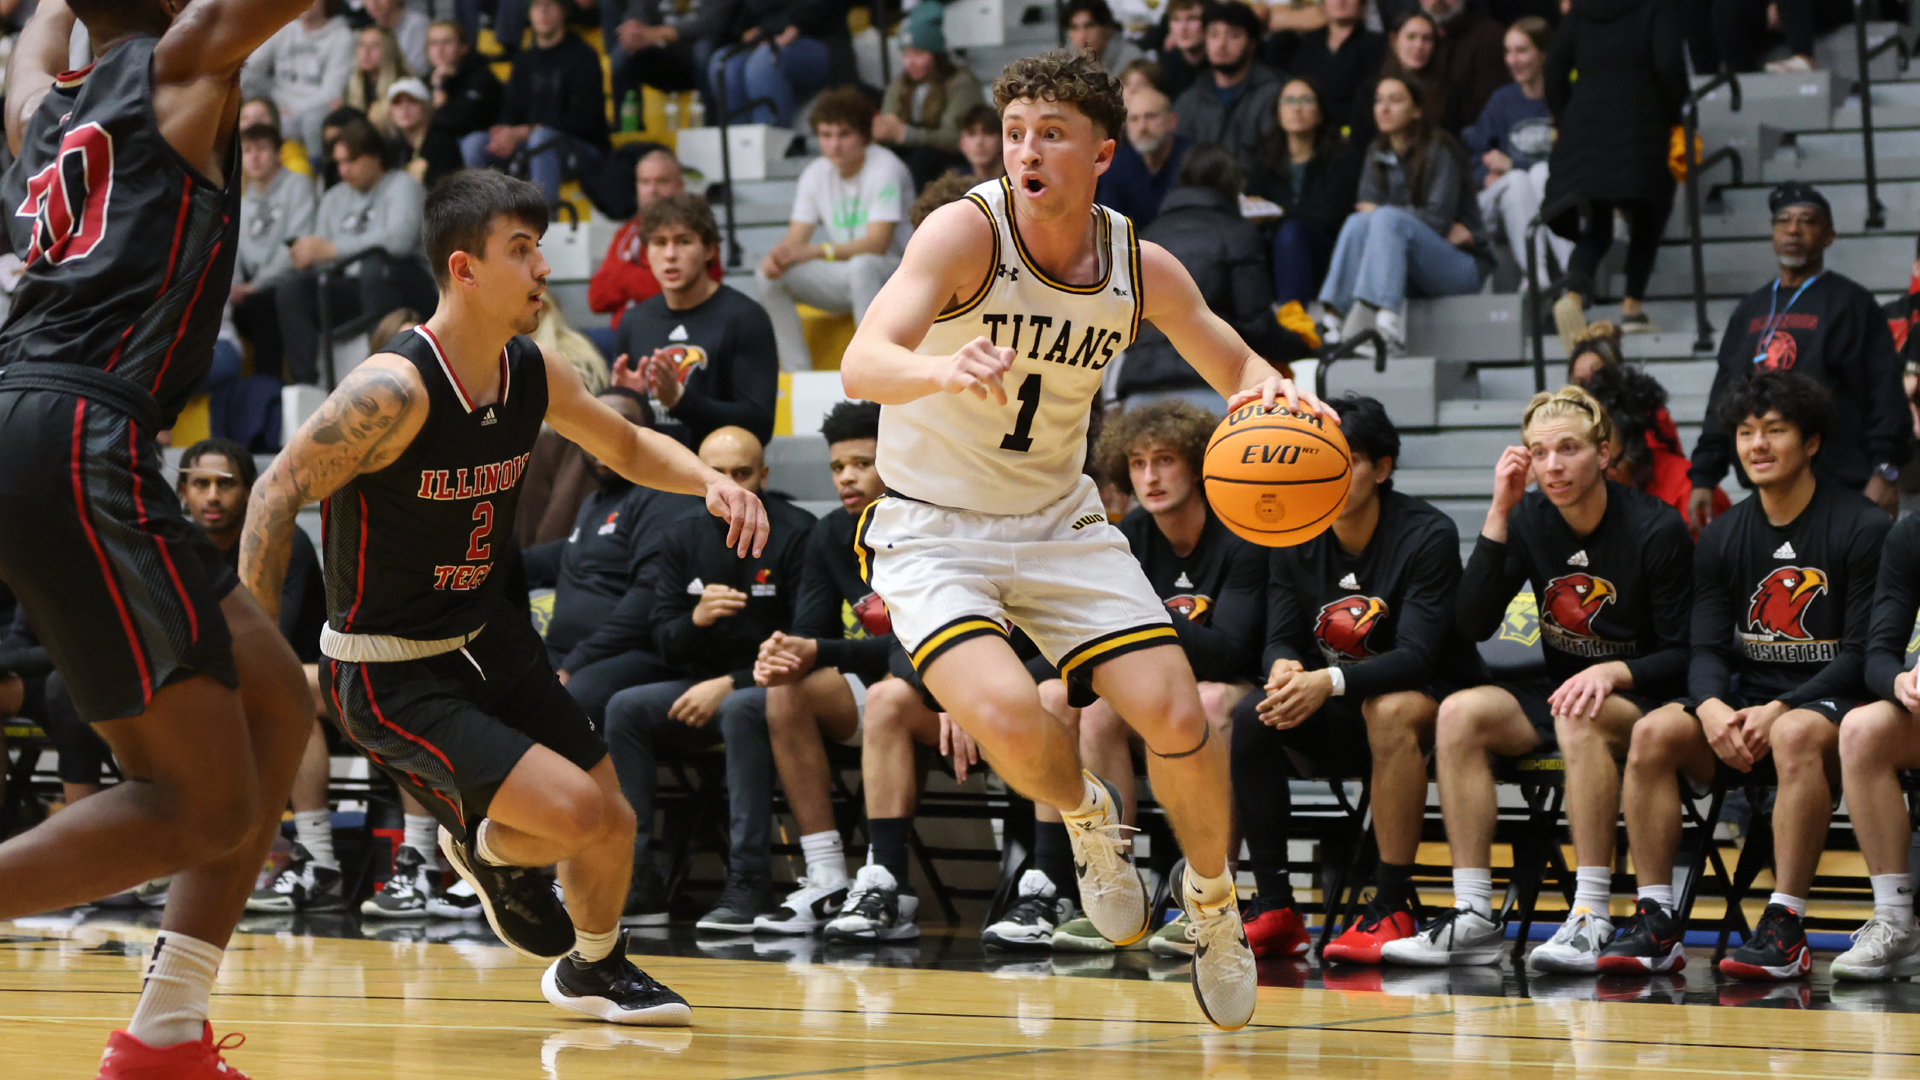 Will Mahoney tied his career-high with 25 points against Illinois Tech on Wednesday night